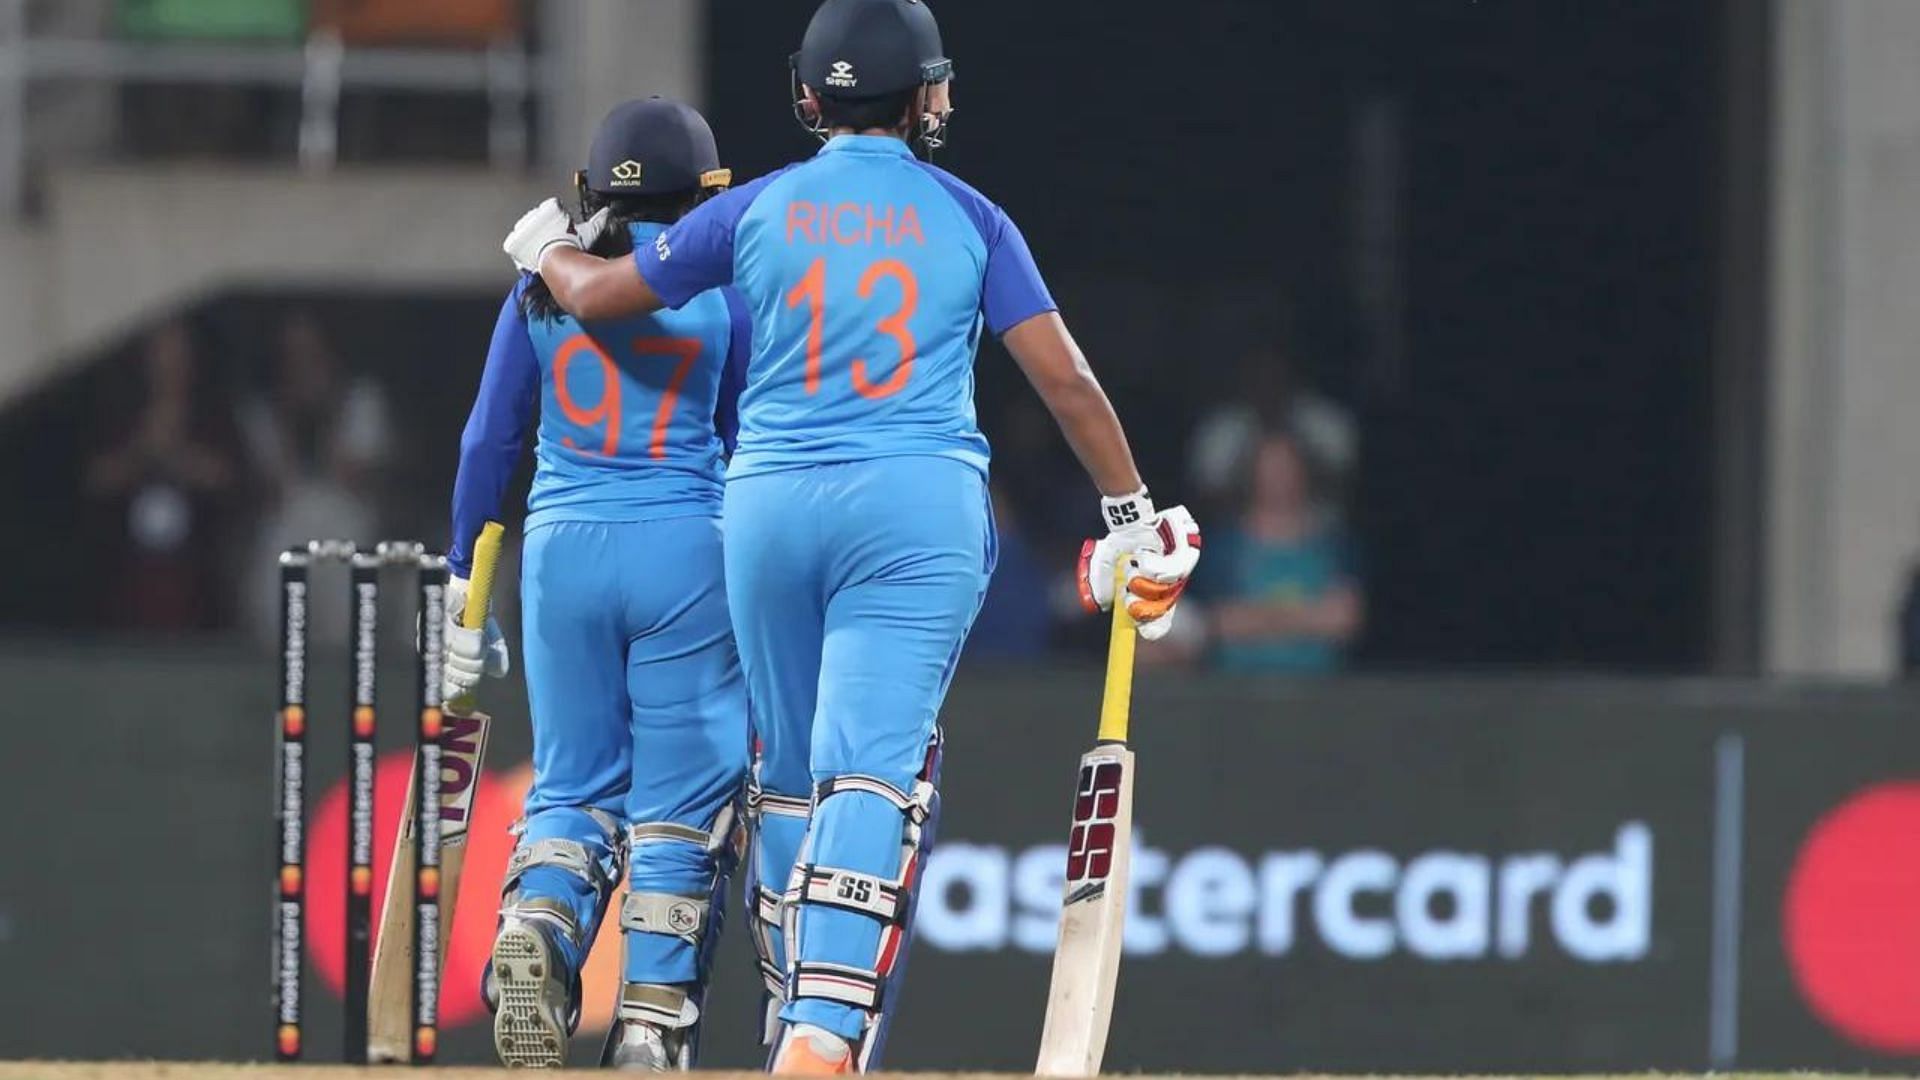 Richa Ghosh congratulating Devika Vaidya for her last-ball boundary to tie the game. (P.C.:BCCI)